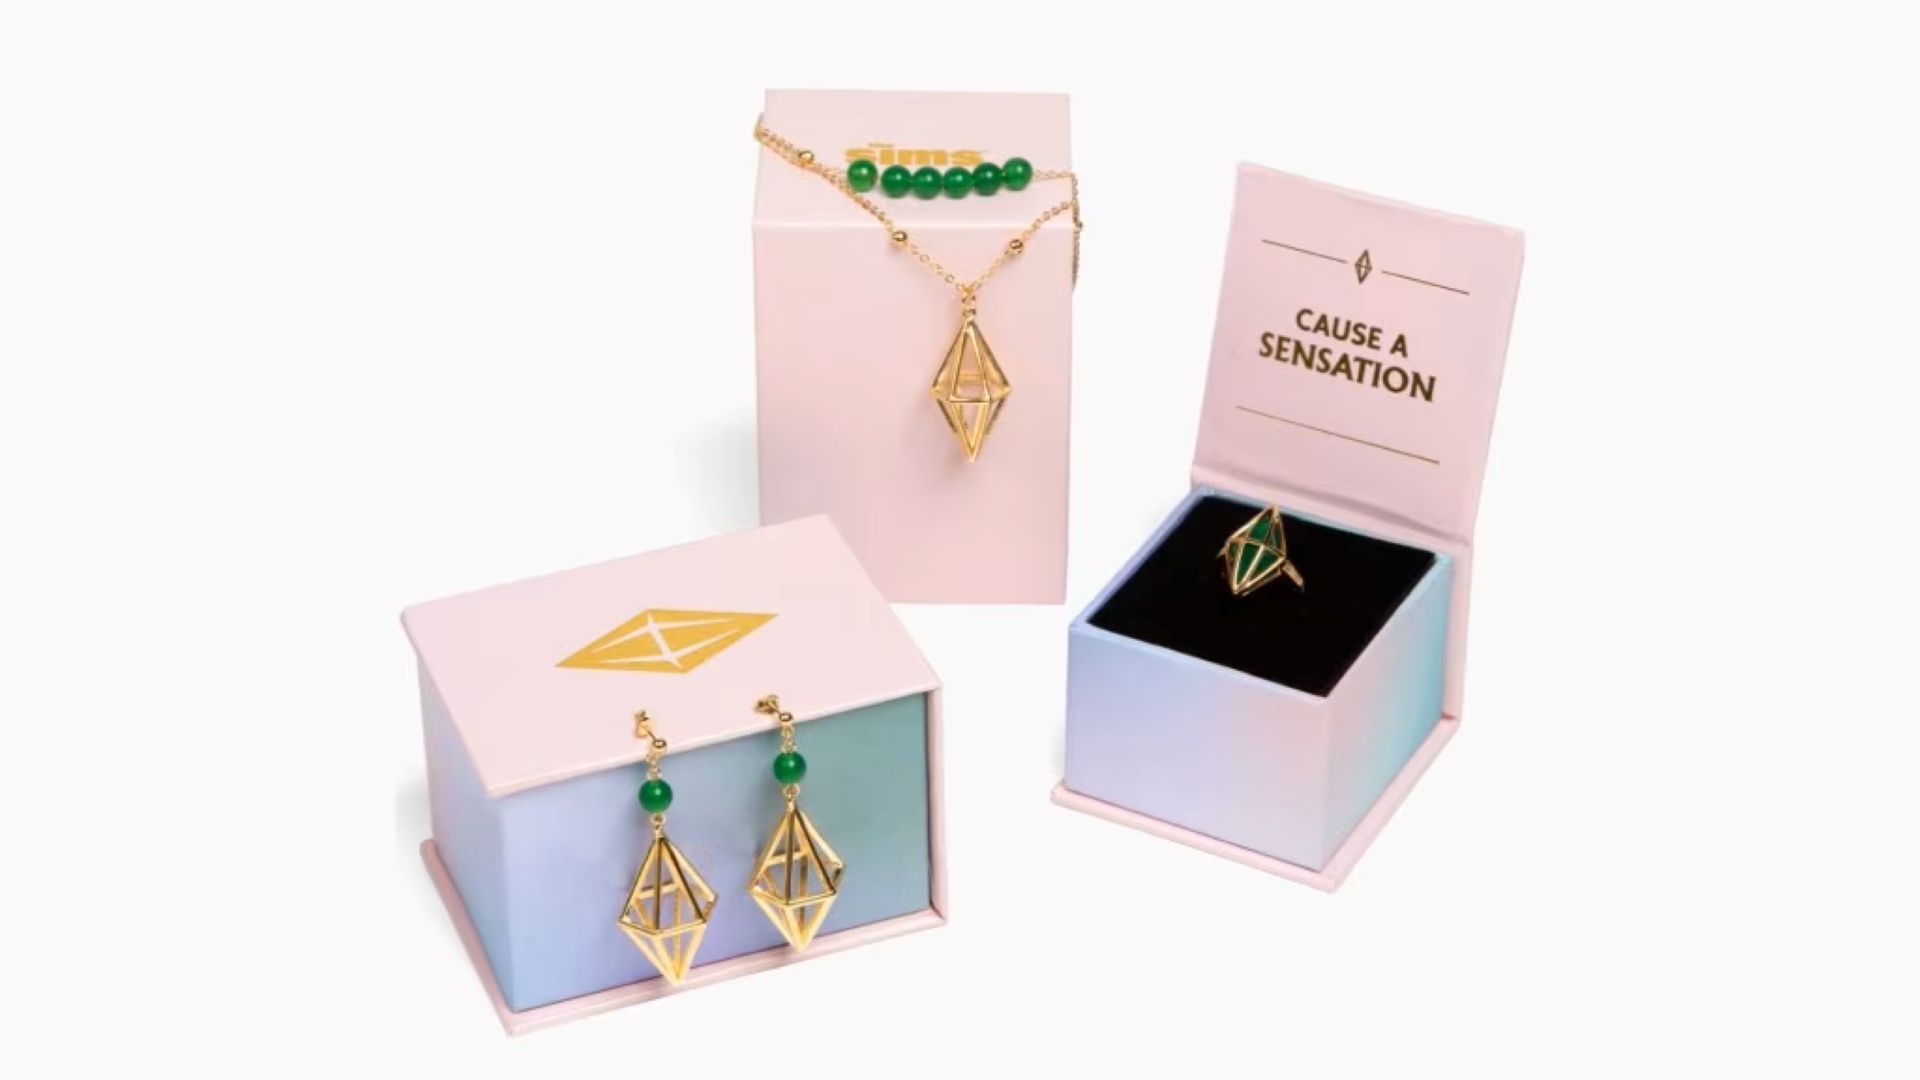 The Sims Real-Life Jewelry Collection Featuring The Iconic Plumbob Is Now Available